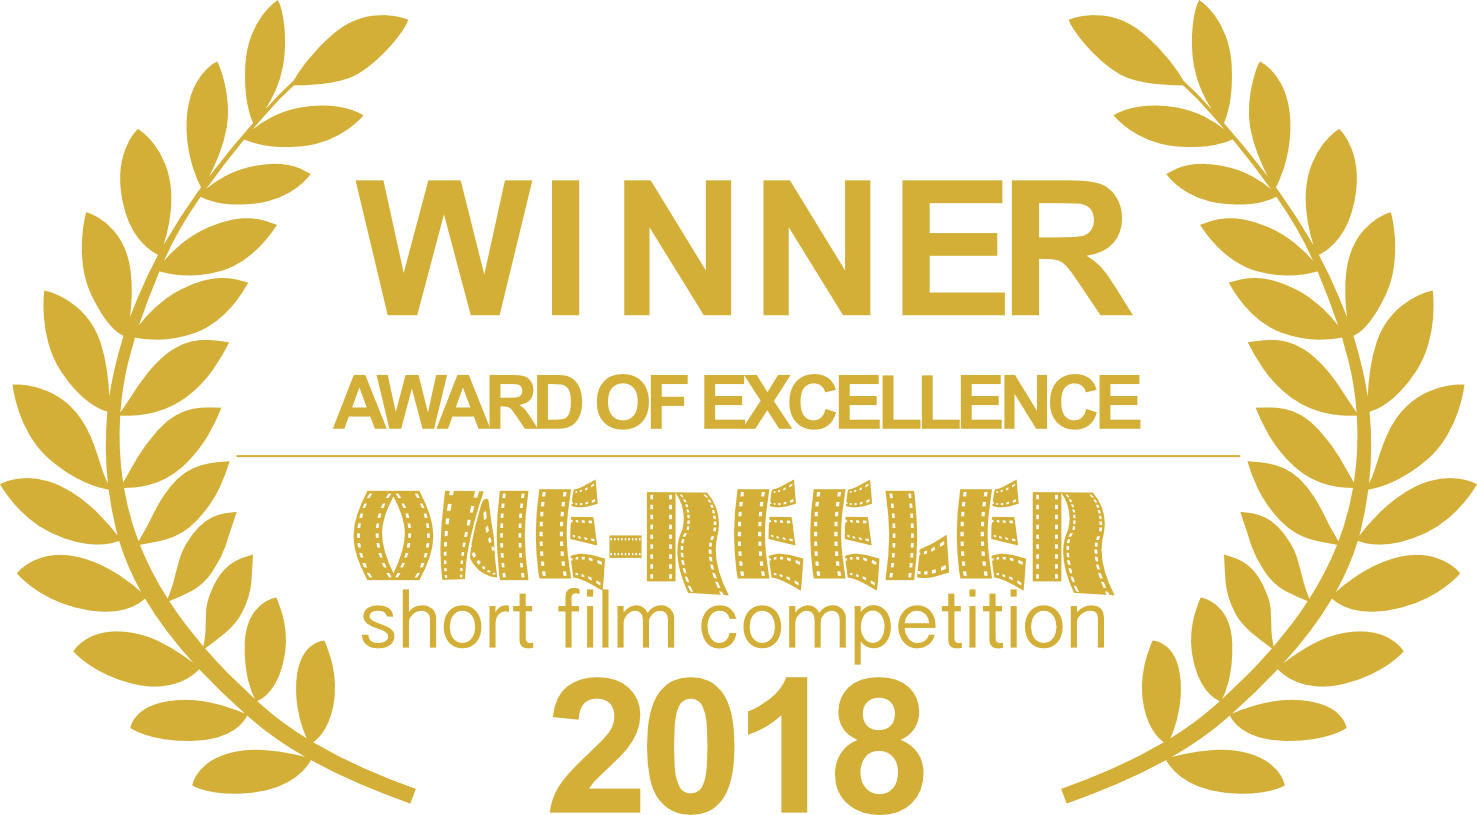 The Carbon Farmer, award-winner at the One-Reeler Short Film Competition 2018